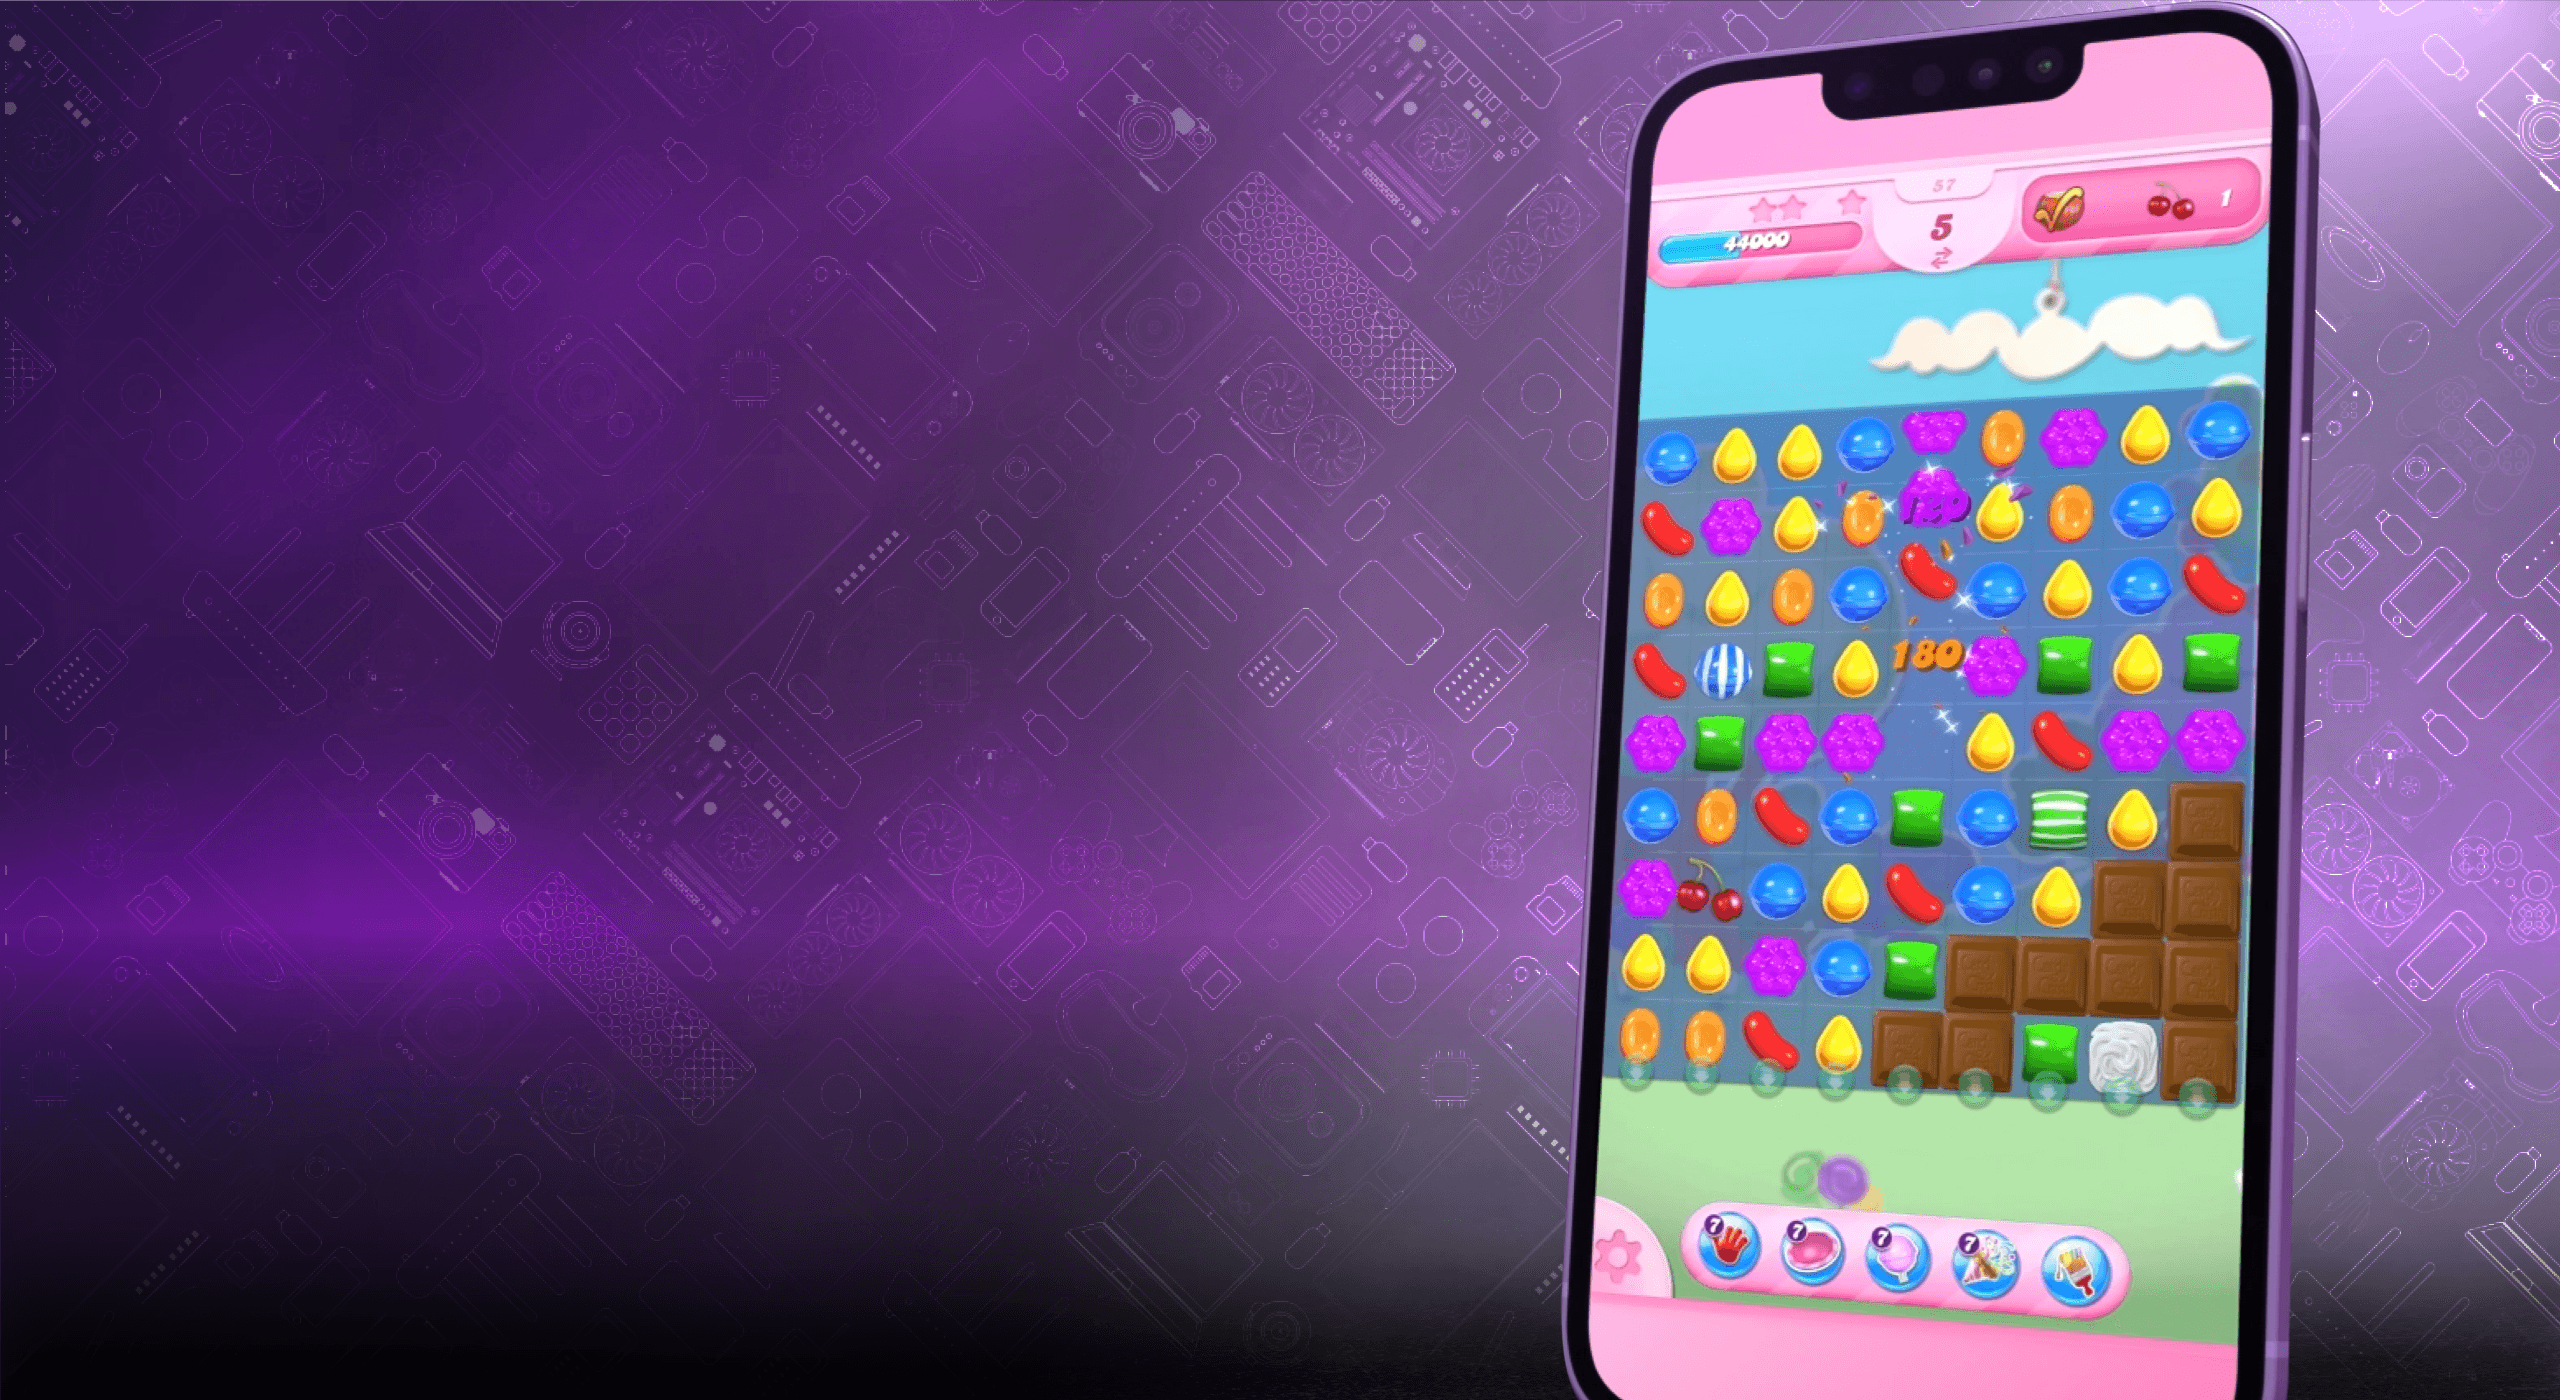 New Research Image - Phone with Candy Crush Saga